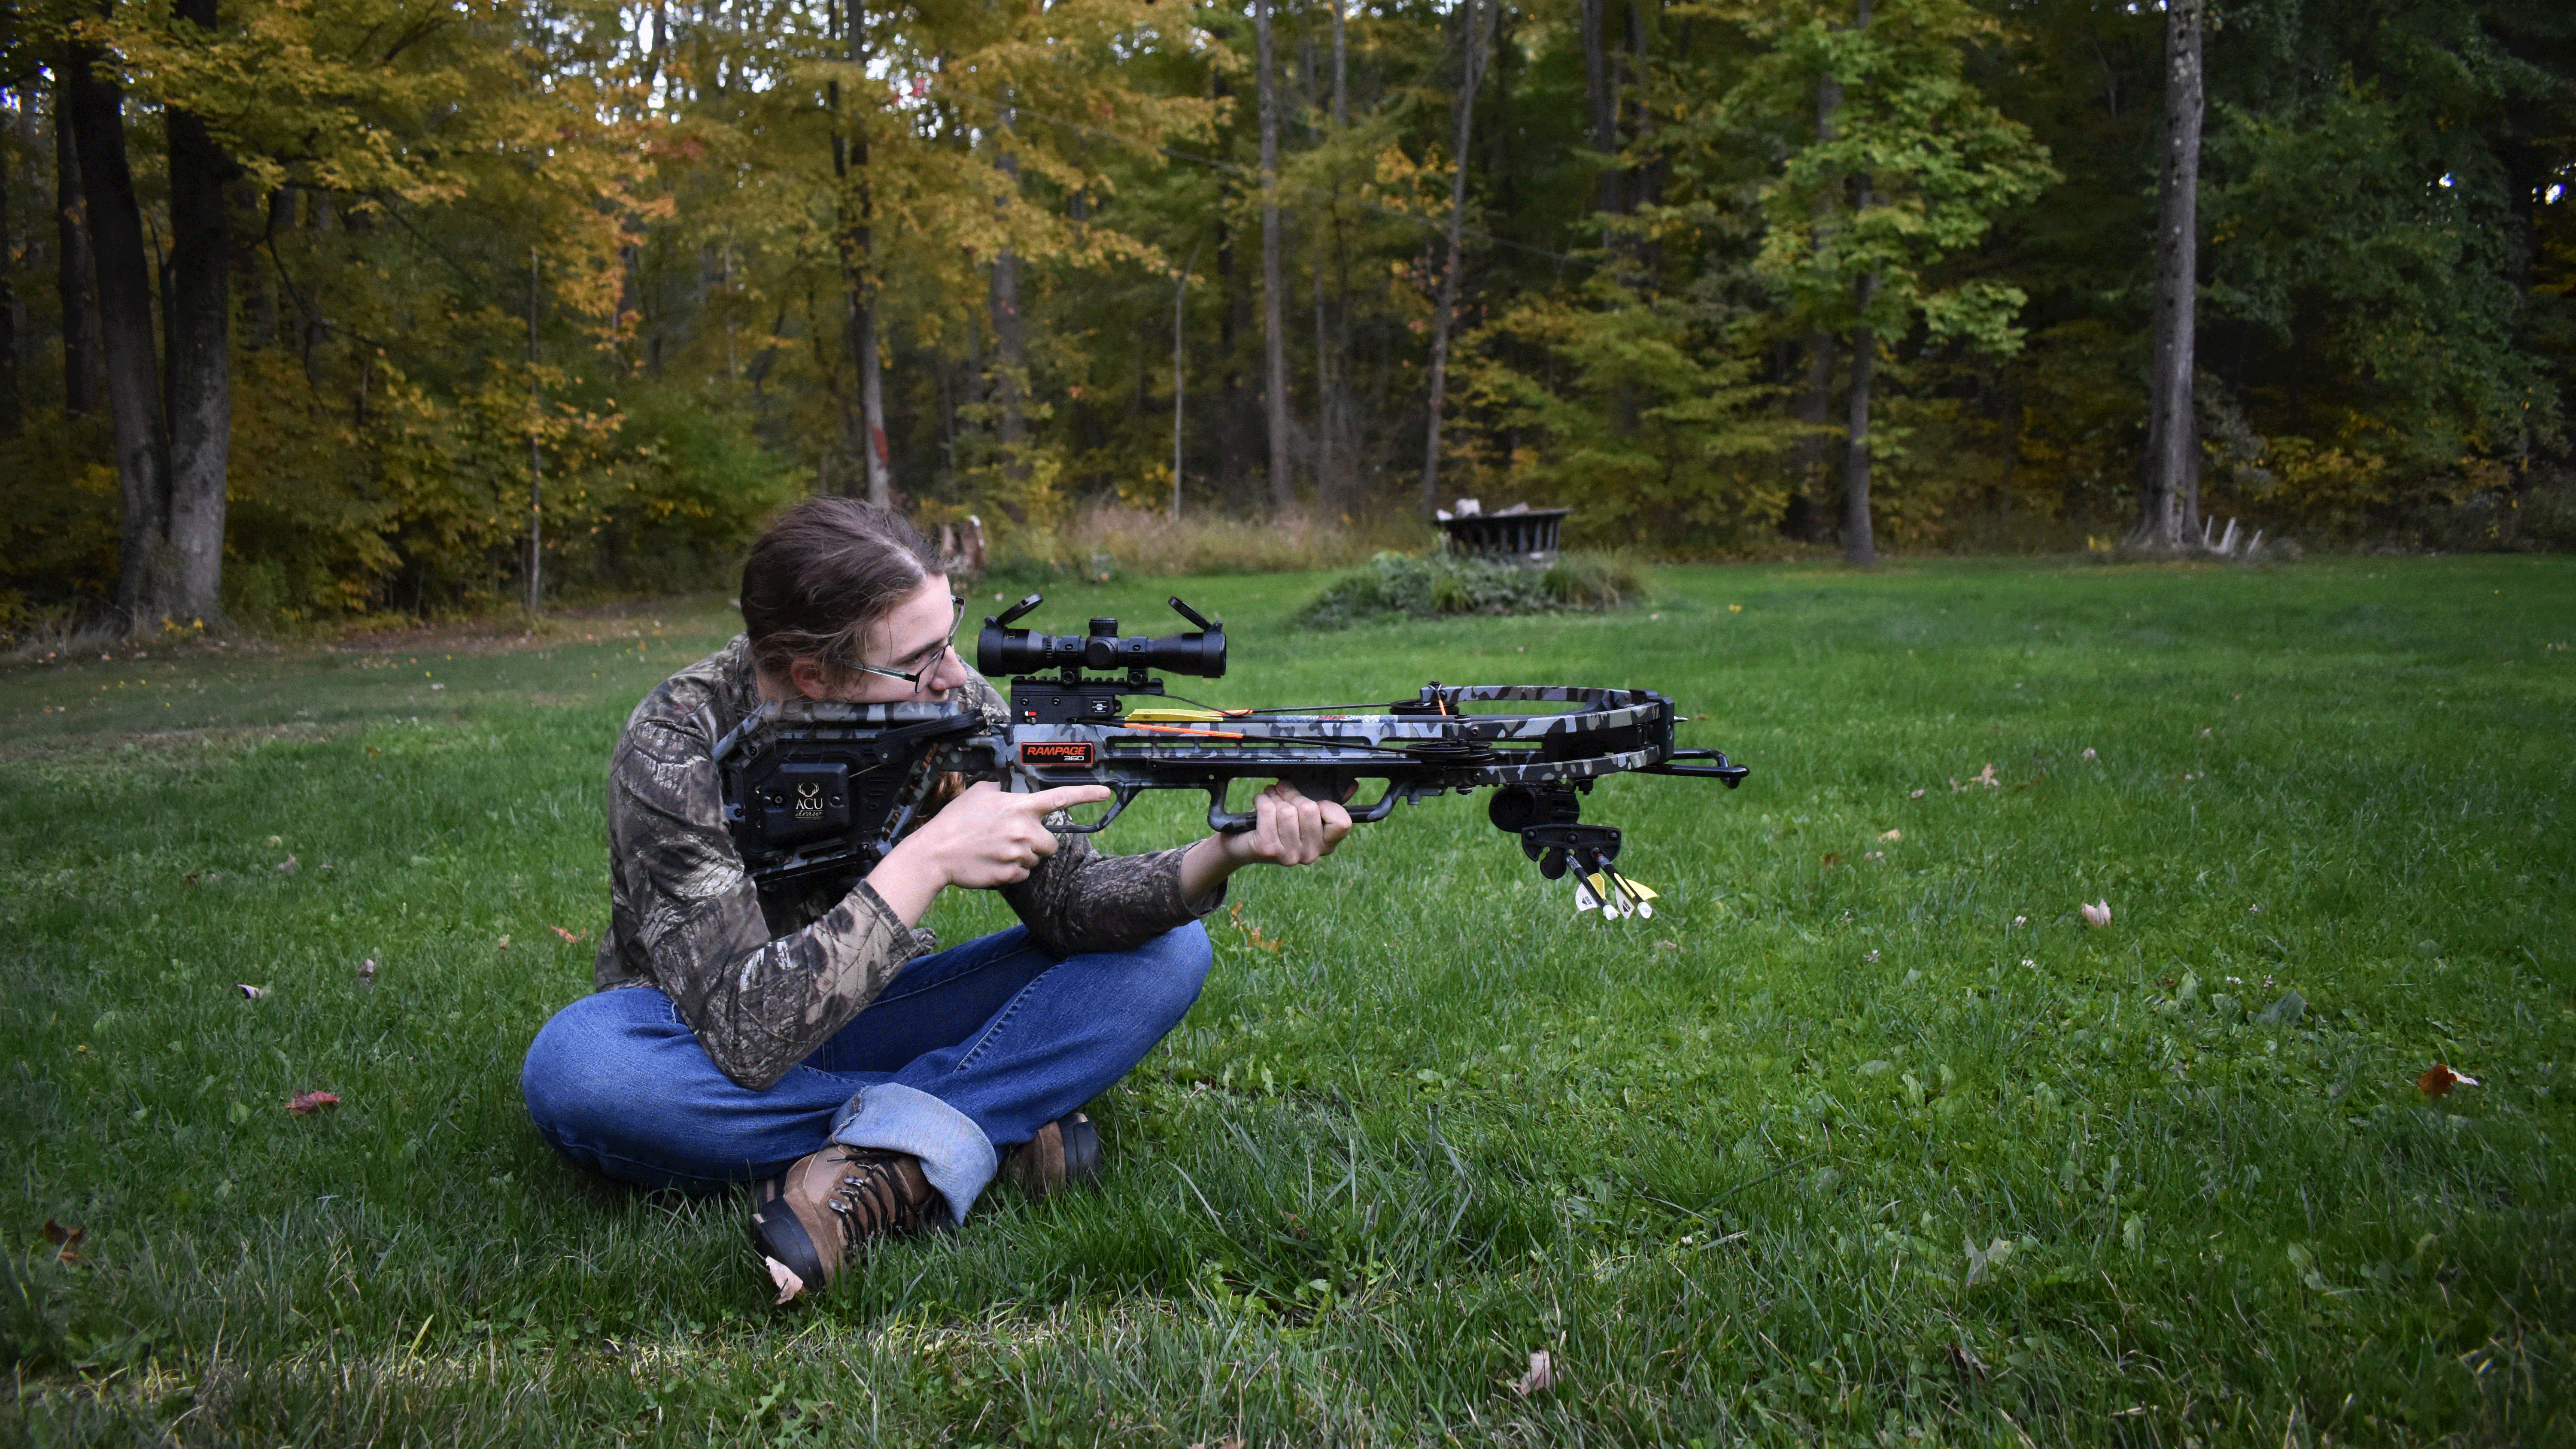 Crossbows for Hunting & Self-Defense